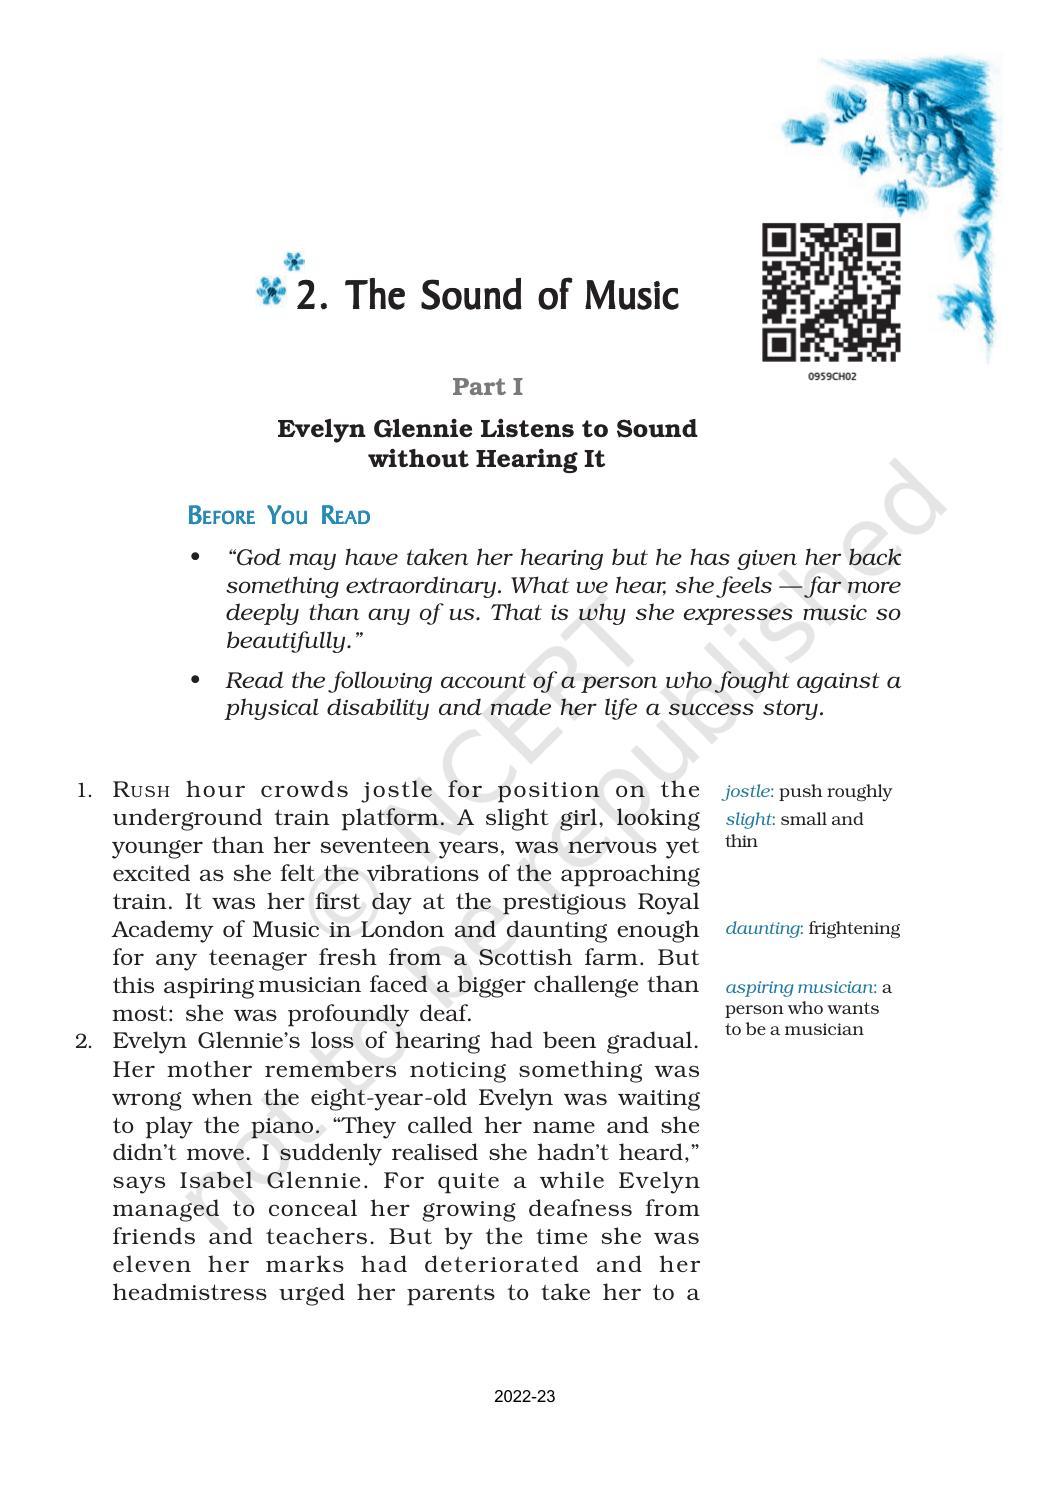 NCERT Book for Class 9 English Chapter 2 The Sound of Music - Page 1